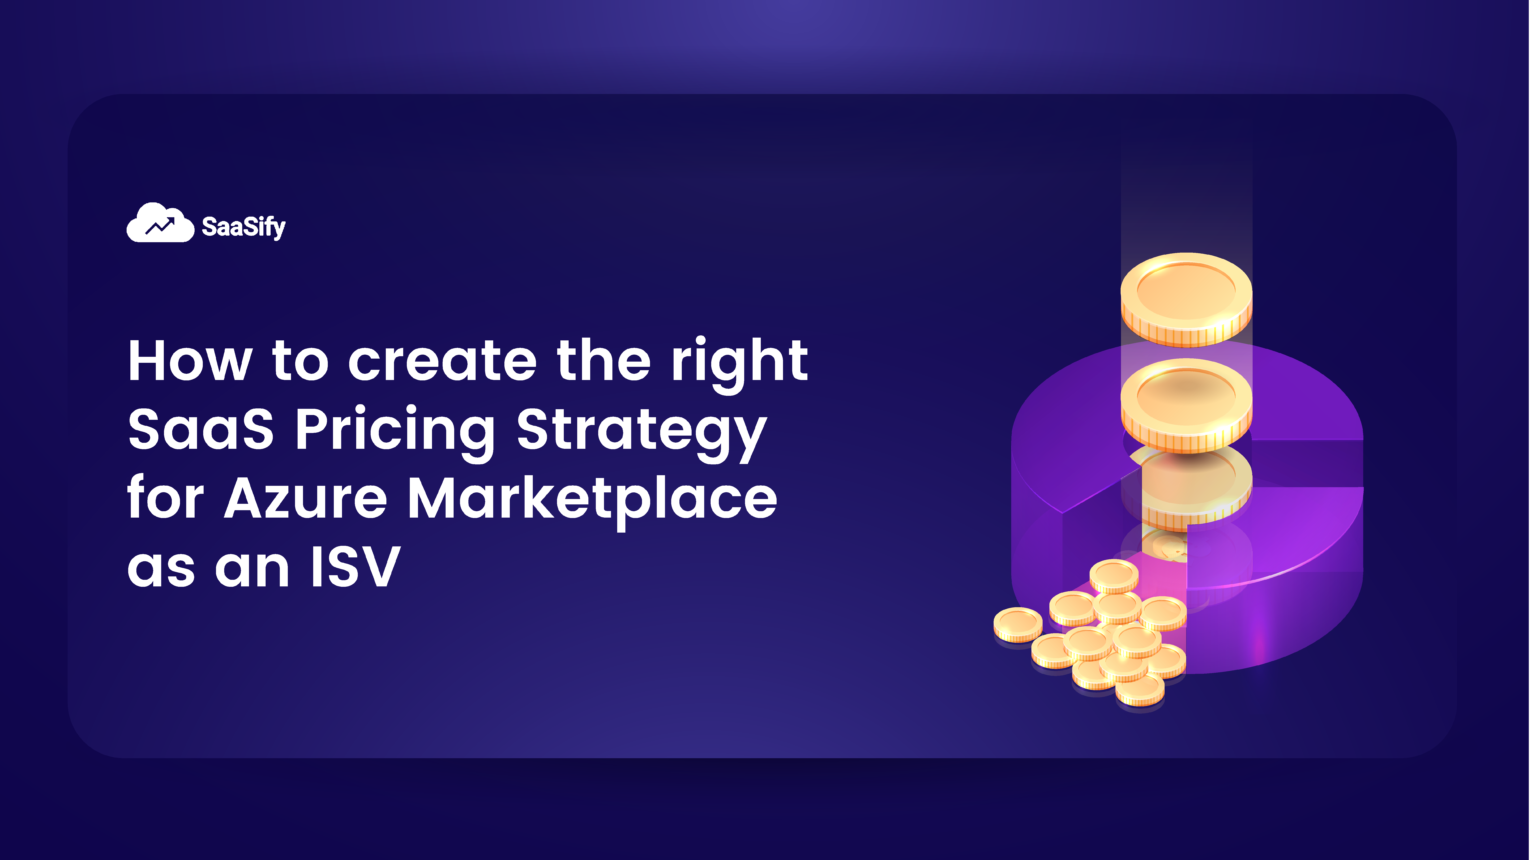 3 ways to create the right SaaS Pricing Strategy for Azure Marketplace as an ISV